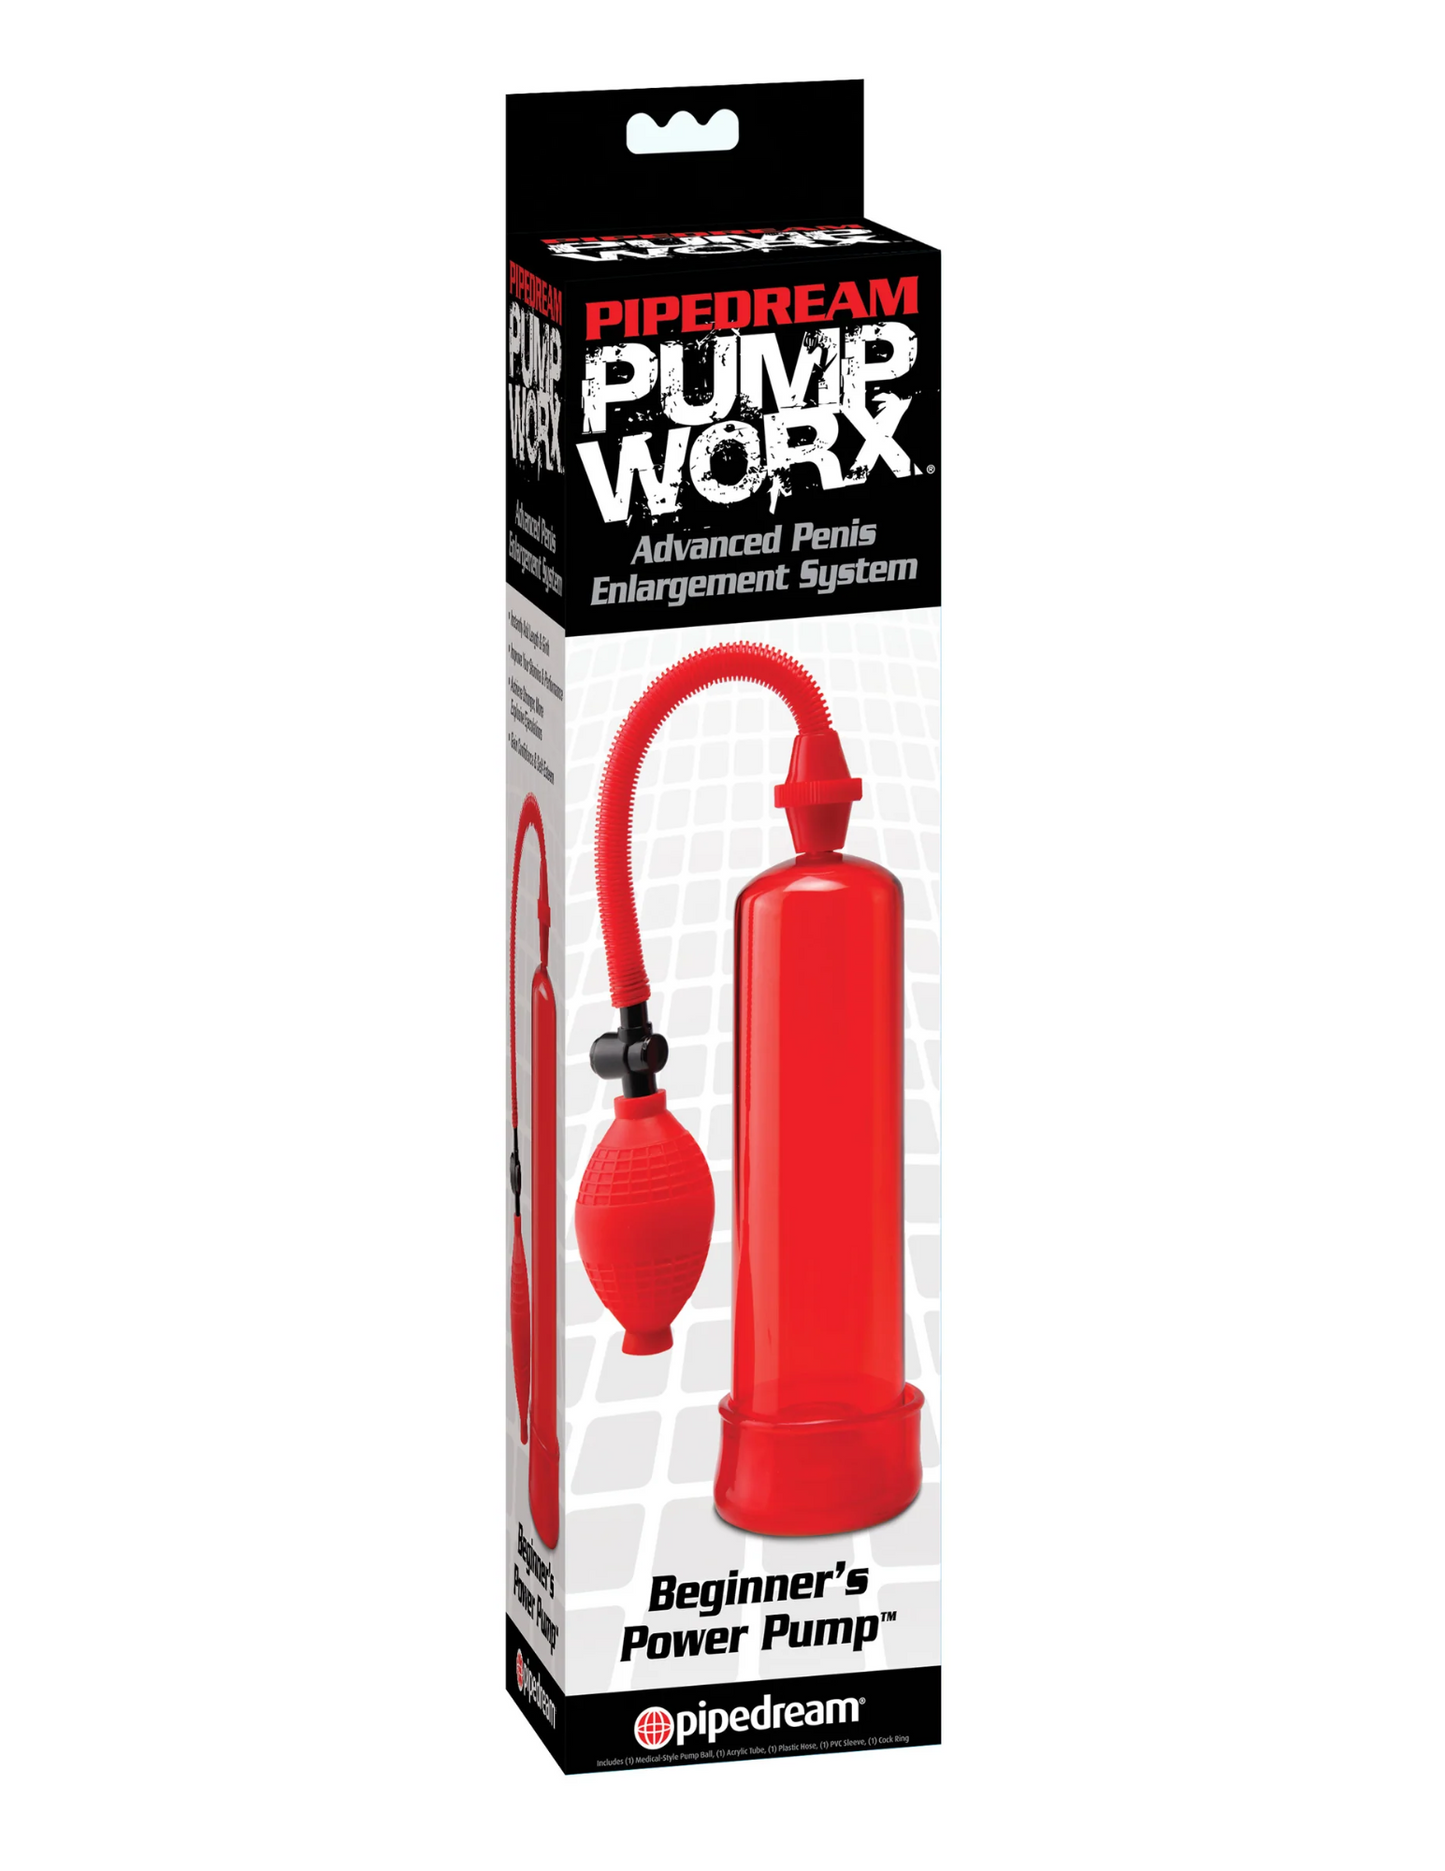 Photo of the box for the Pump Worx Beginner's Penis Enlargement System from Pipedreams (red).